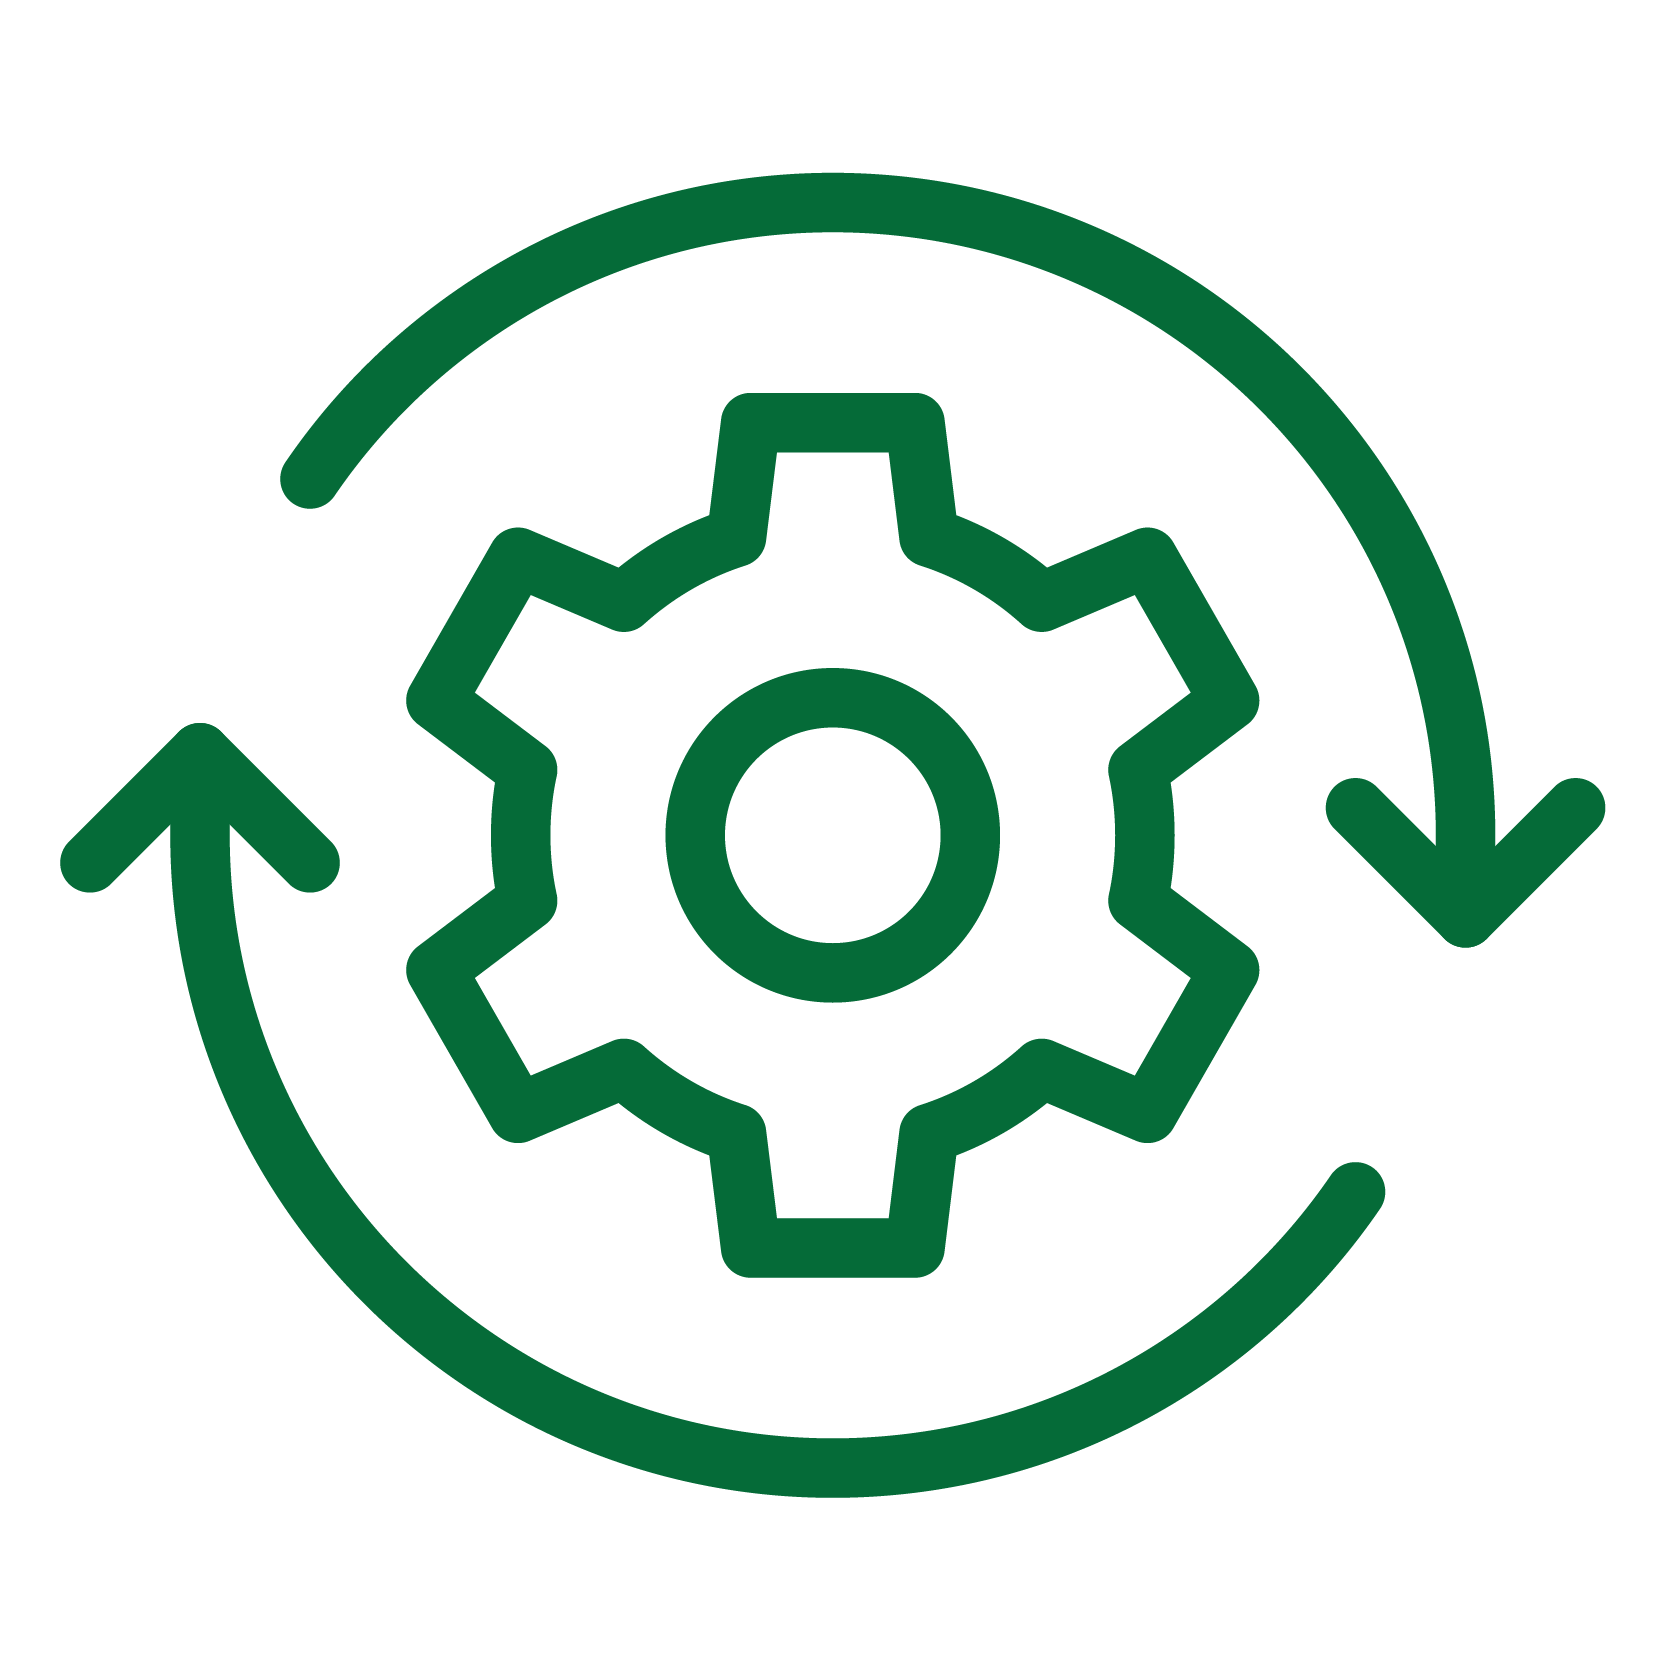 A rotating gear icon